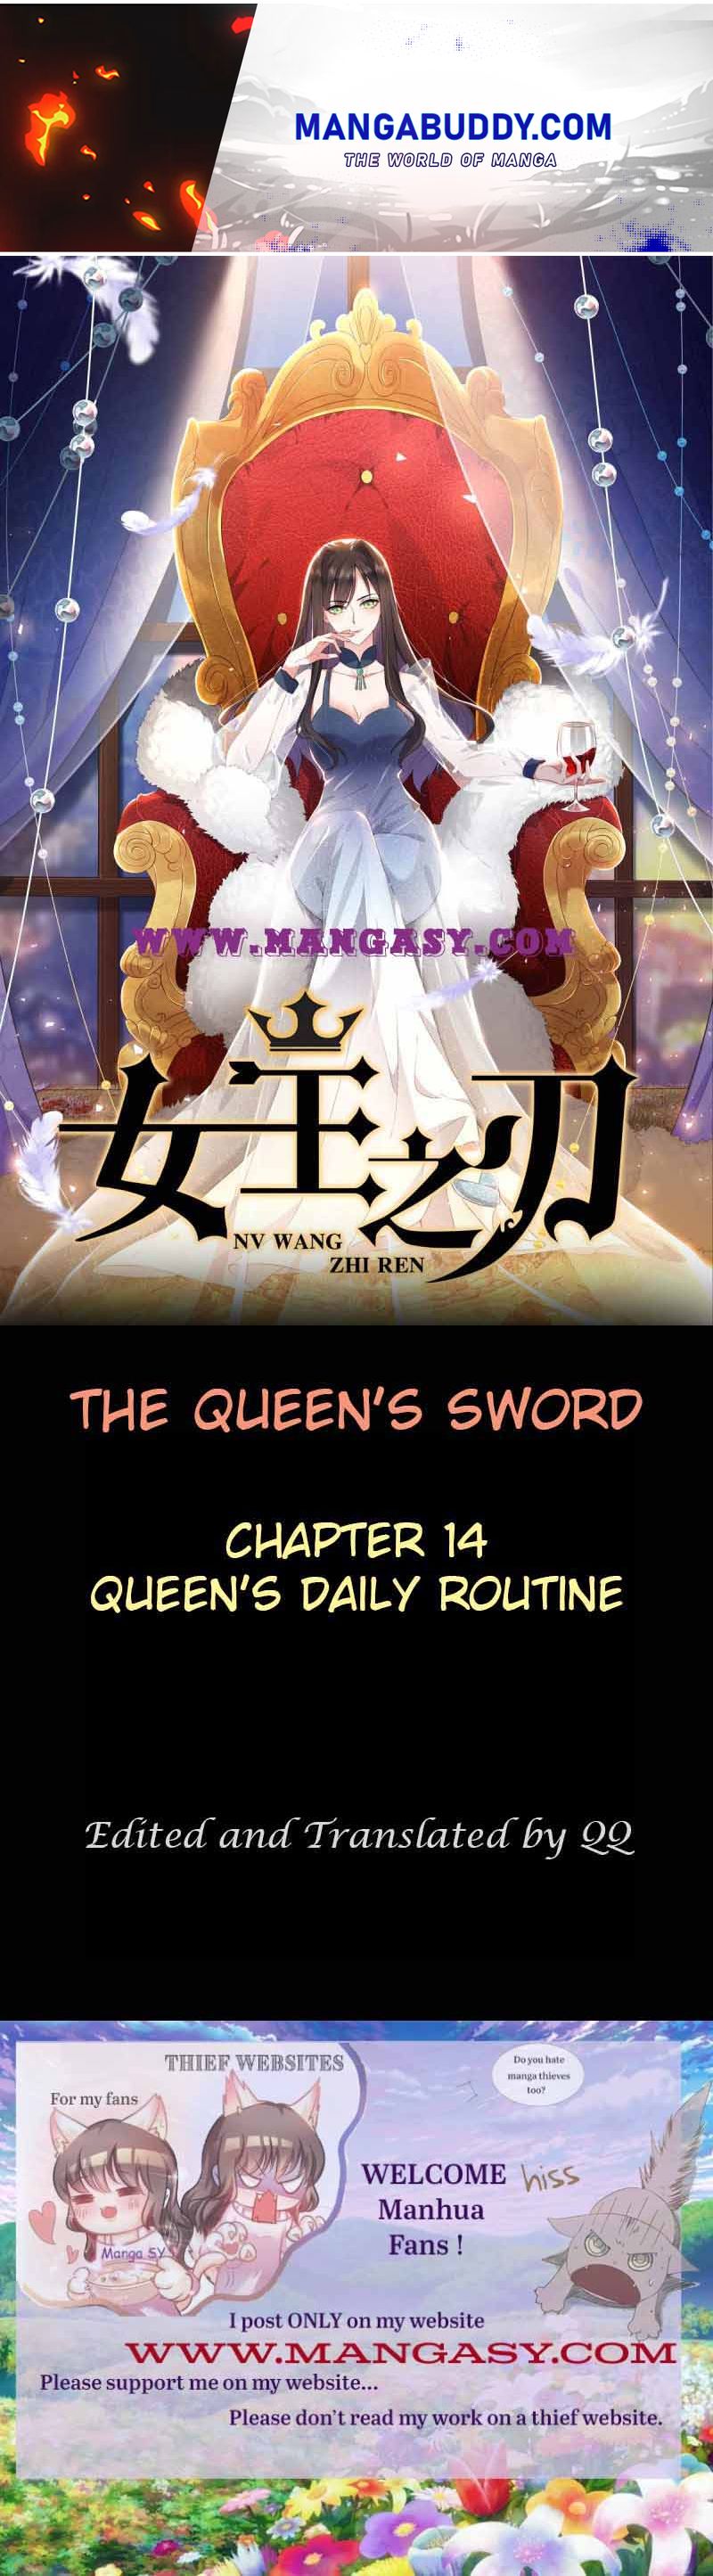 The Queen's Blade - Page 1